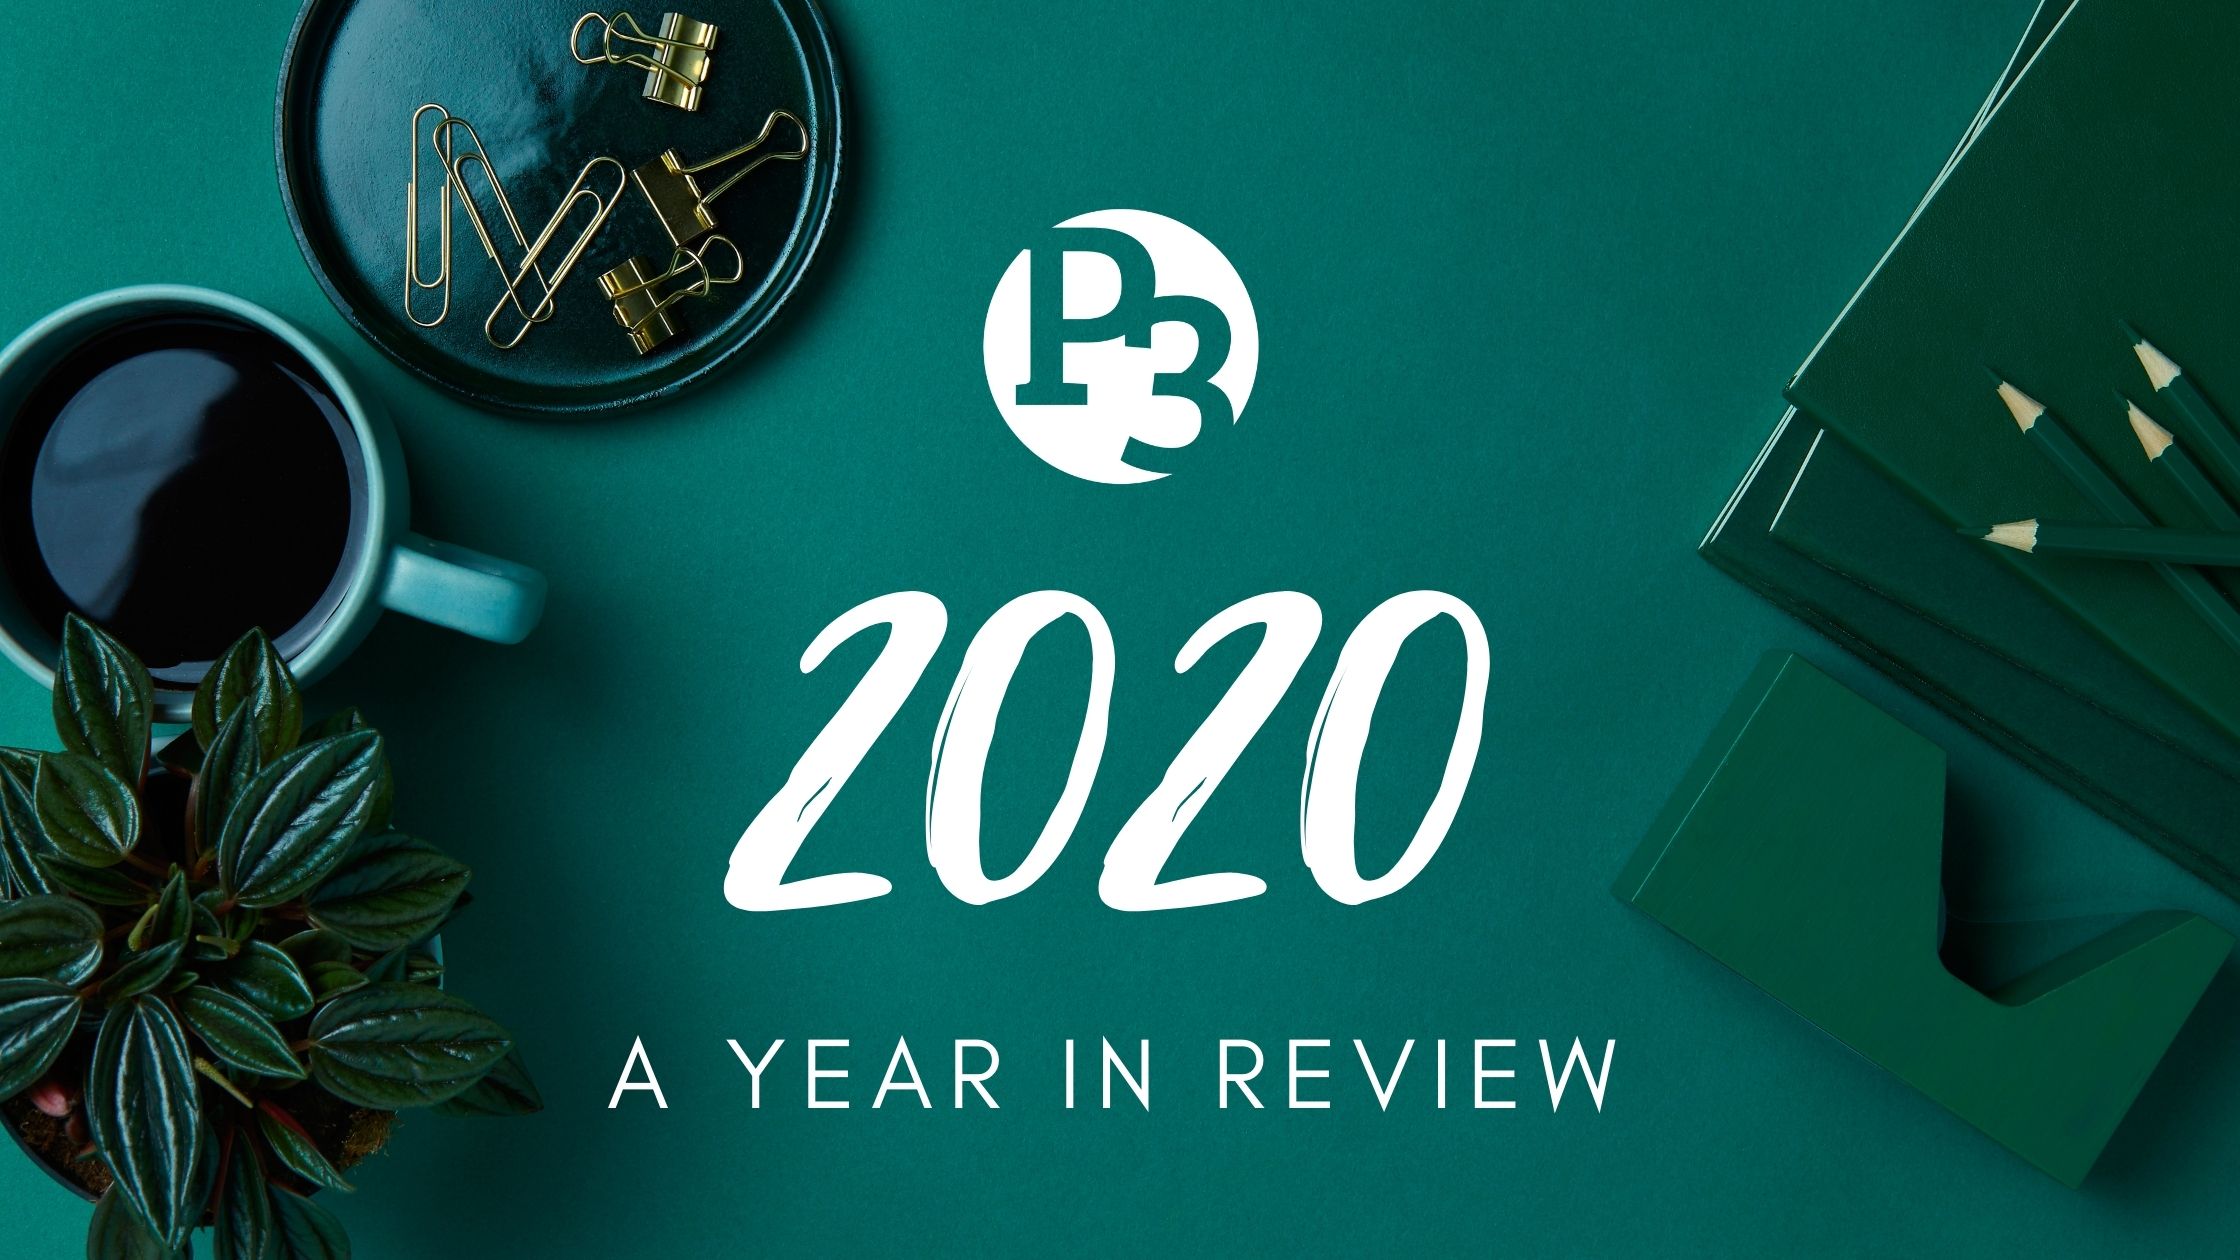 P3 2020 Year in Review